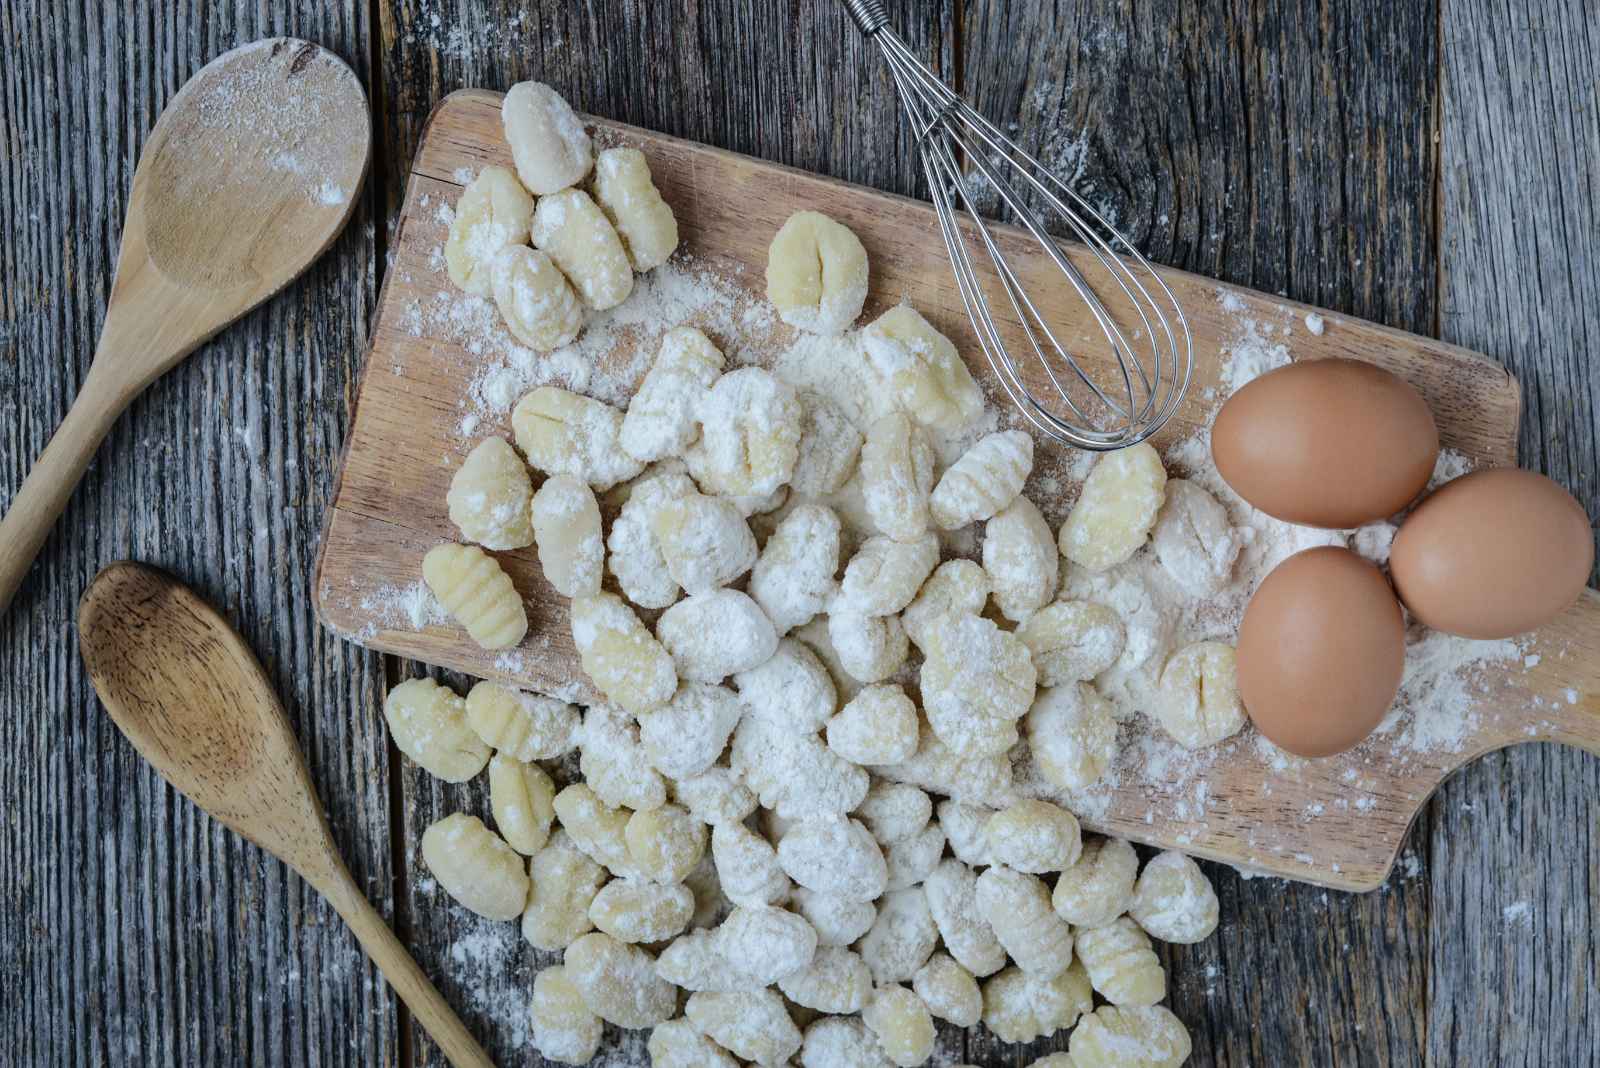 Cool Facts About South America Gnocchi Day